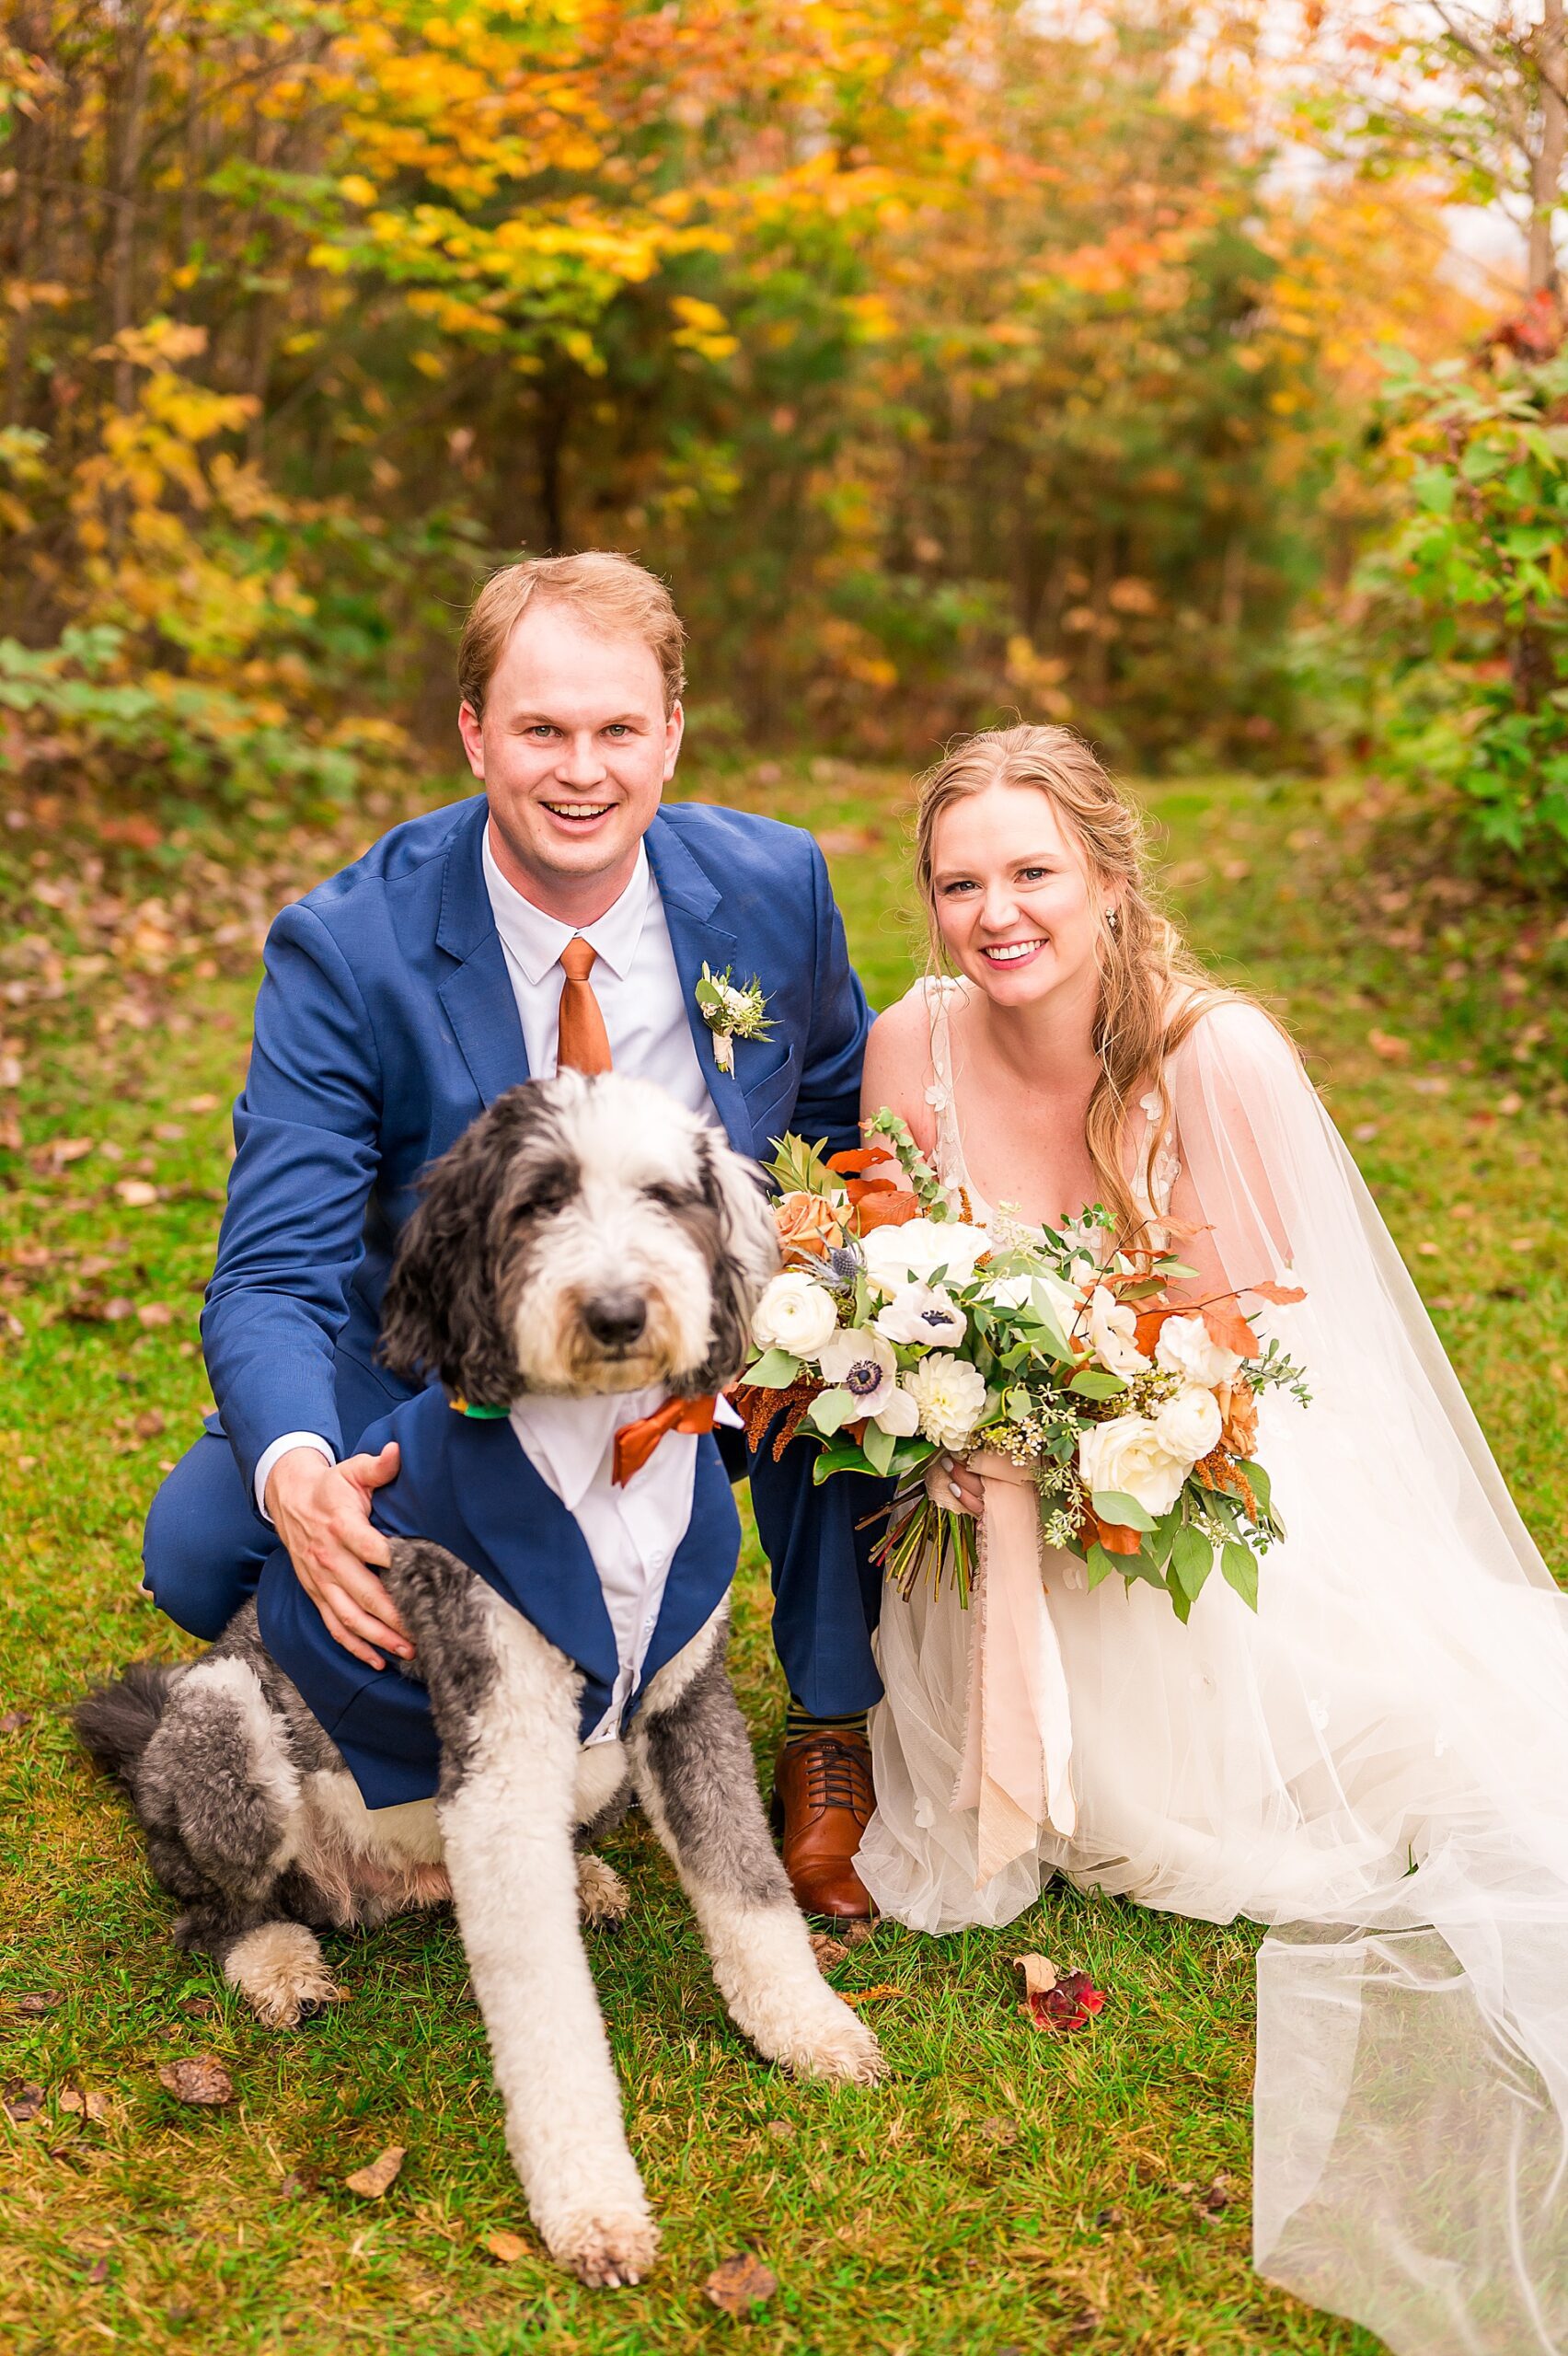 newlywed portraits from Enchanting Fall Wedding in Vermont at The Alerin Barn